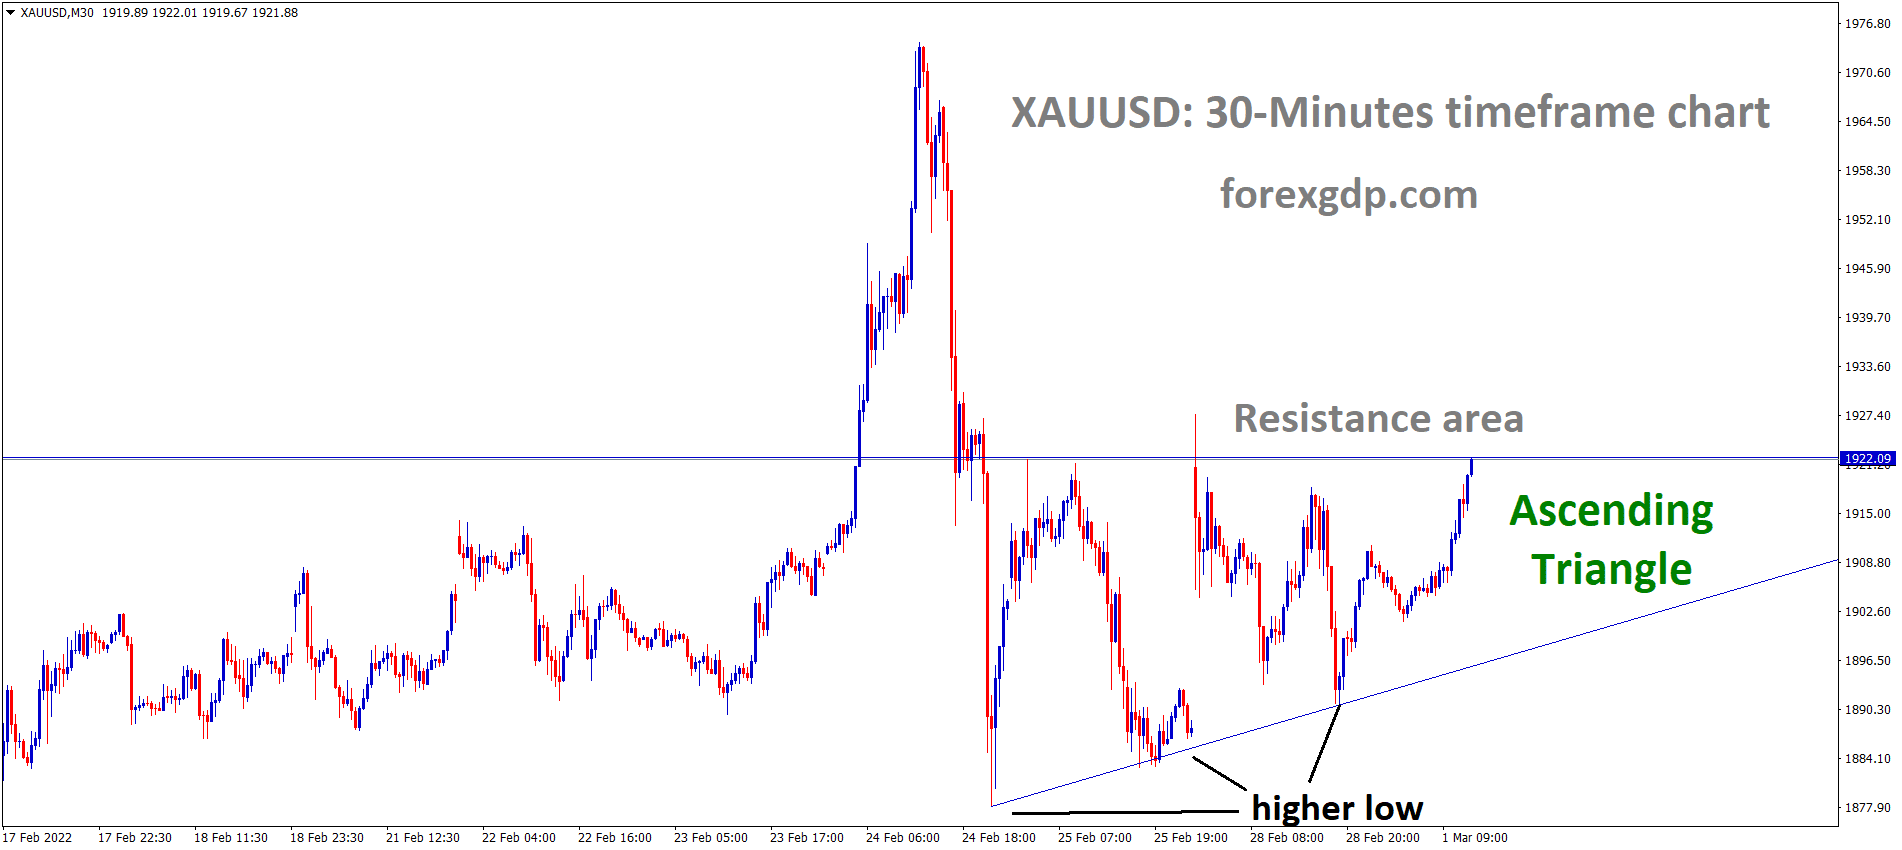 XAUUSD Gold price is moving in an ascending triangle pattern and the market has reached the Horizontal Resistance area of the pattern.